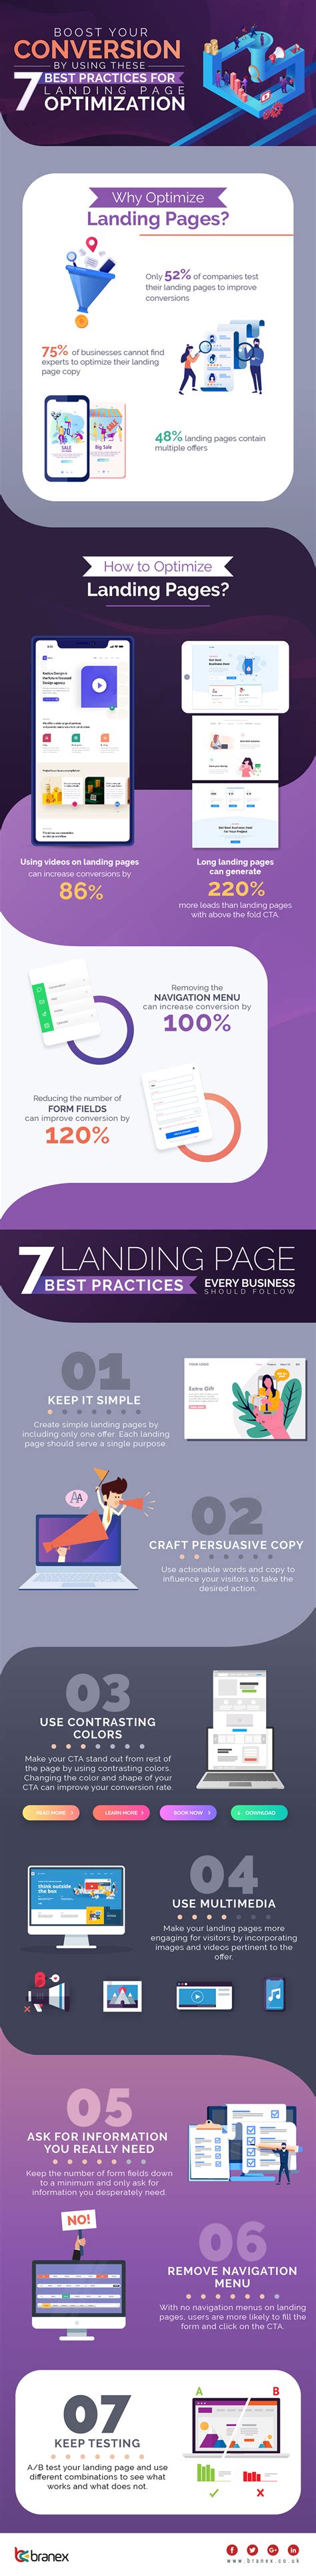 7 landing page best practices to improve your website